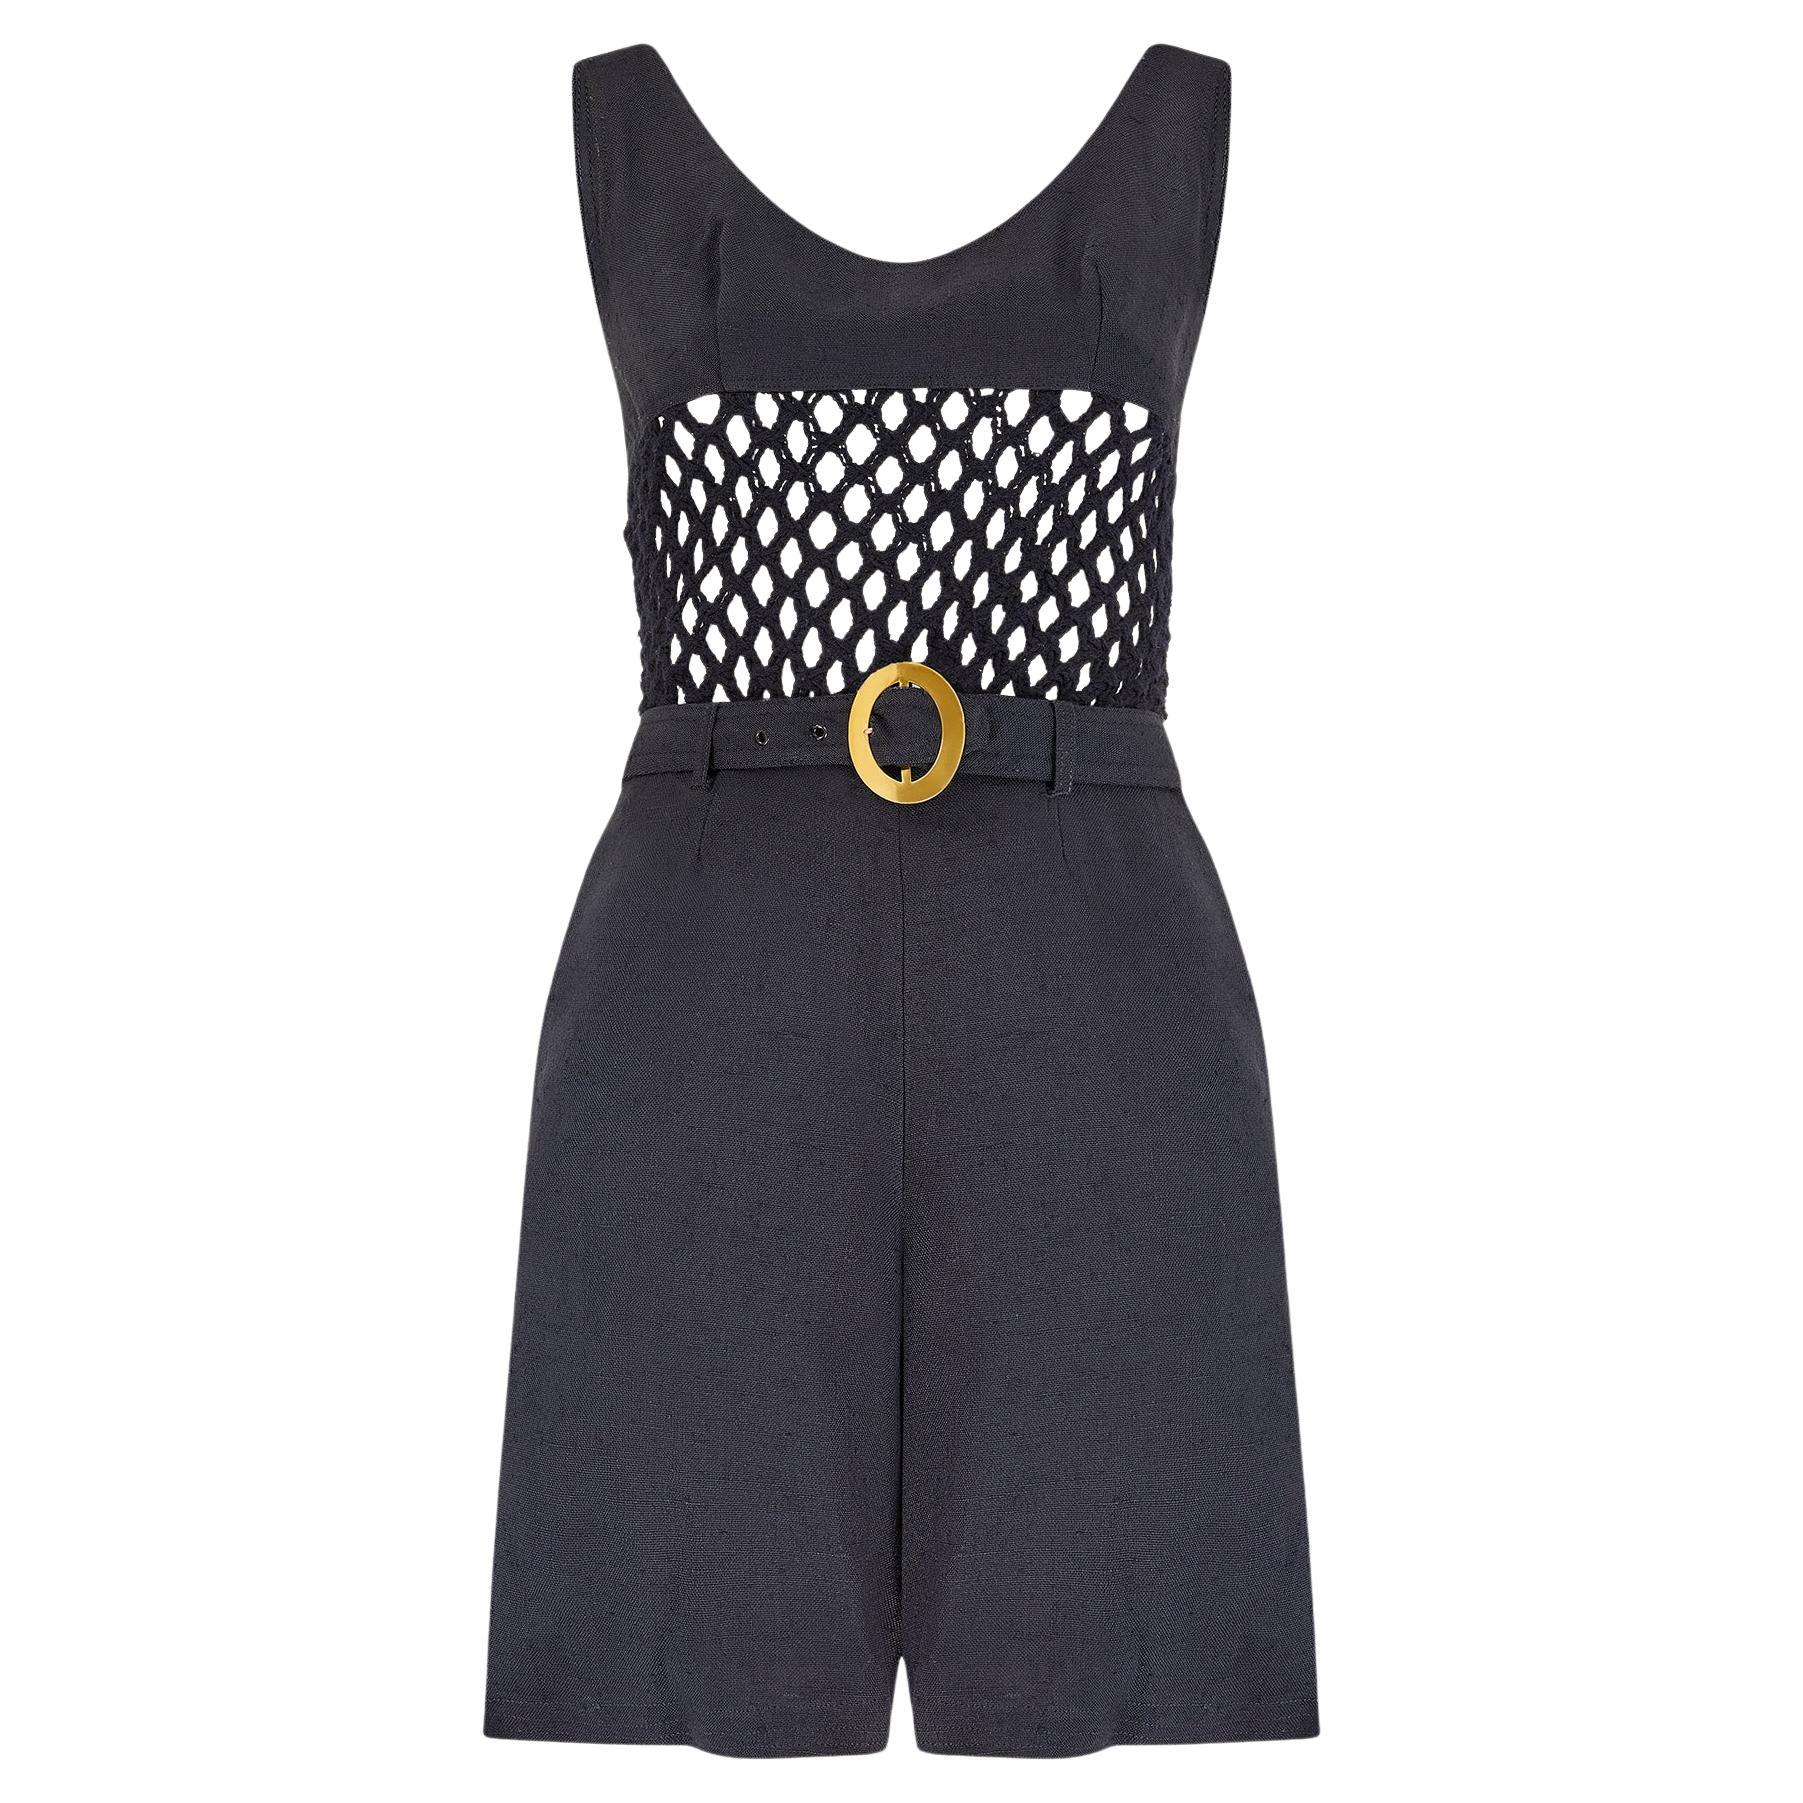 1965 Mary Quant Documented Black Playsuit with Crochet Bodice For Sale